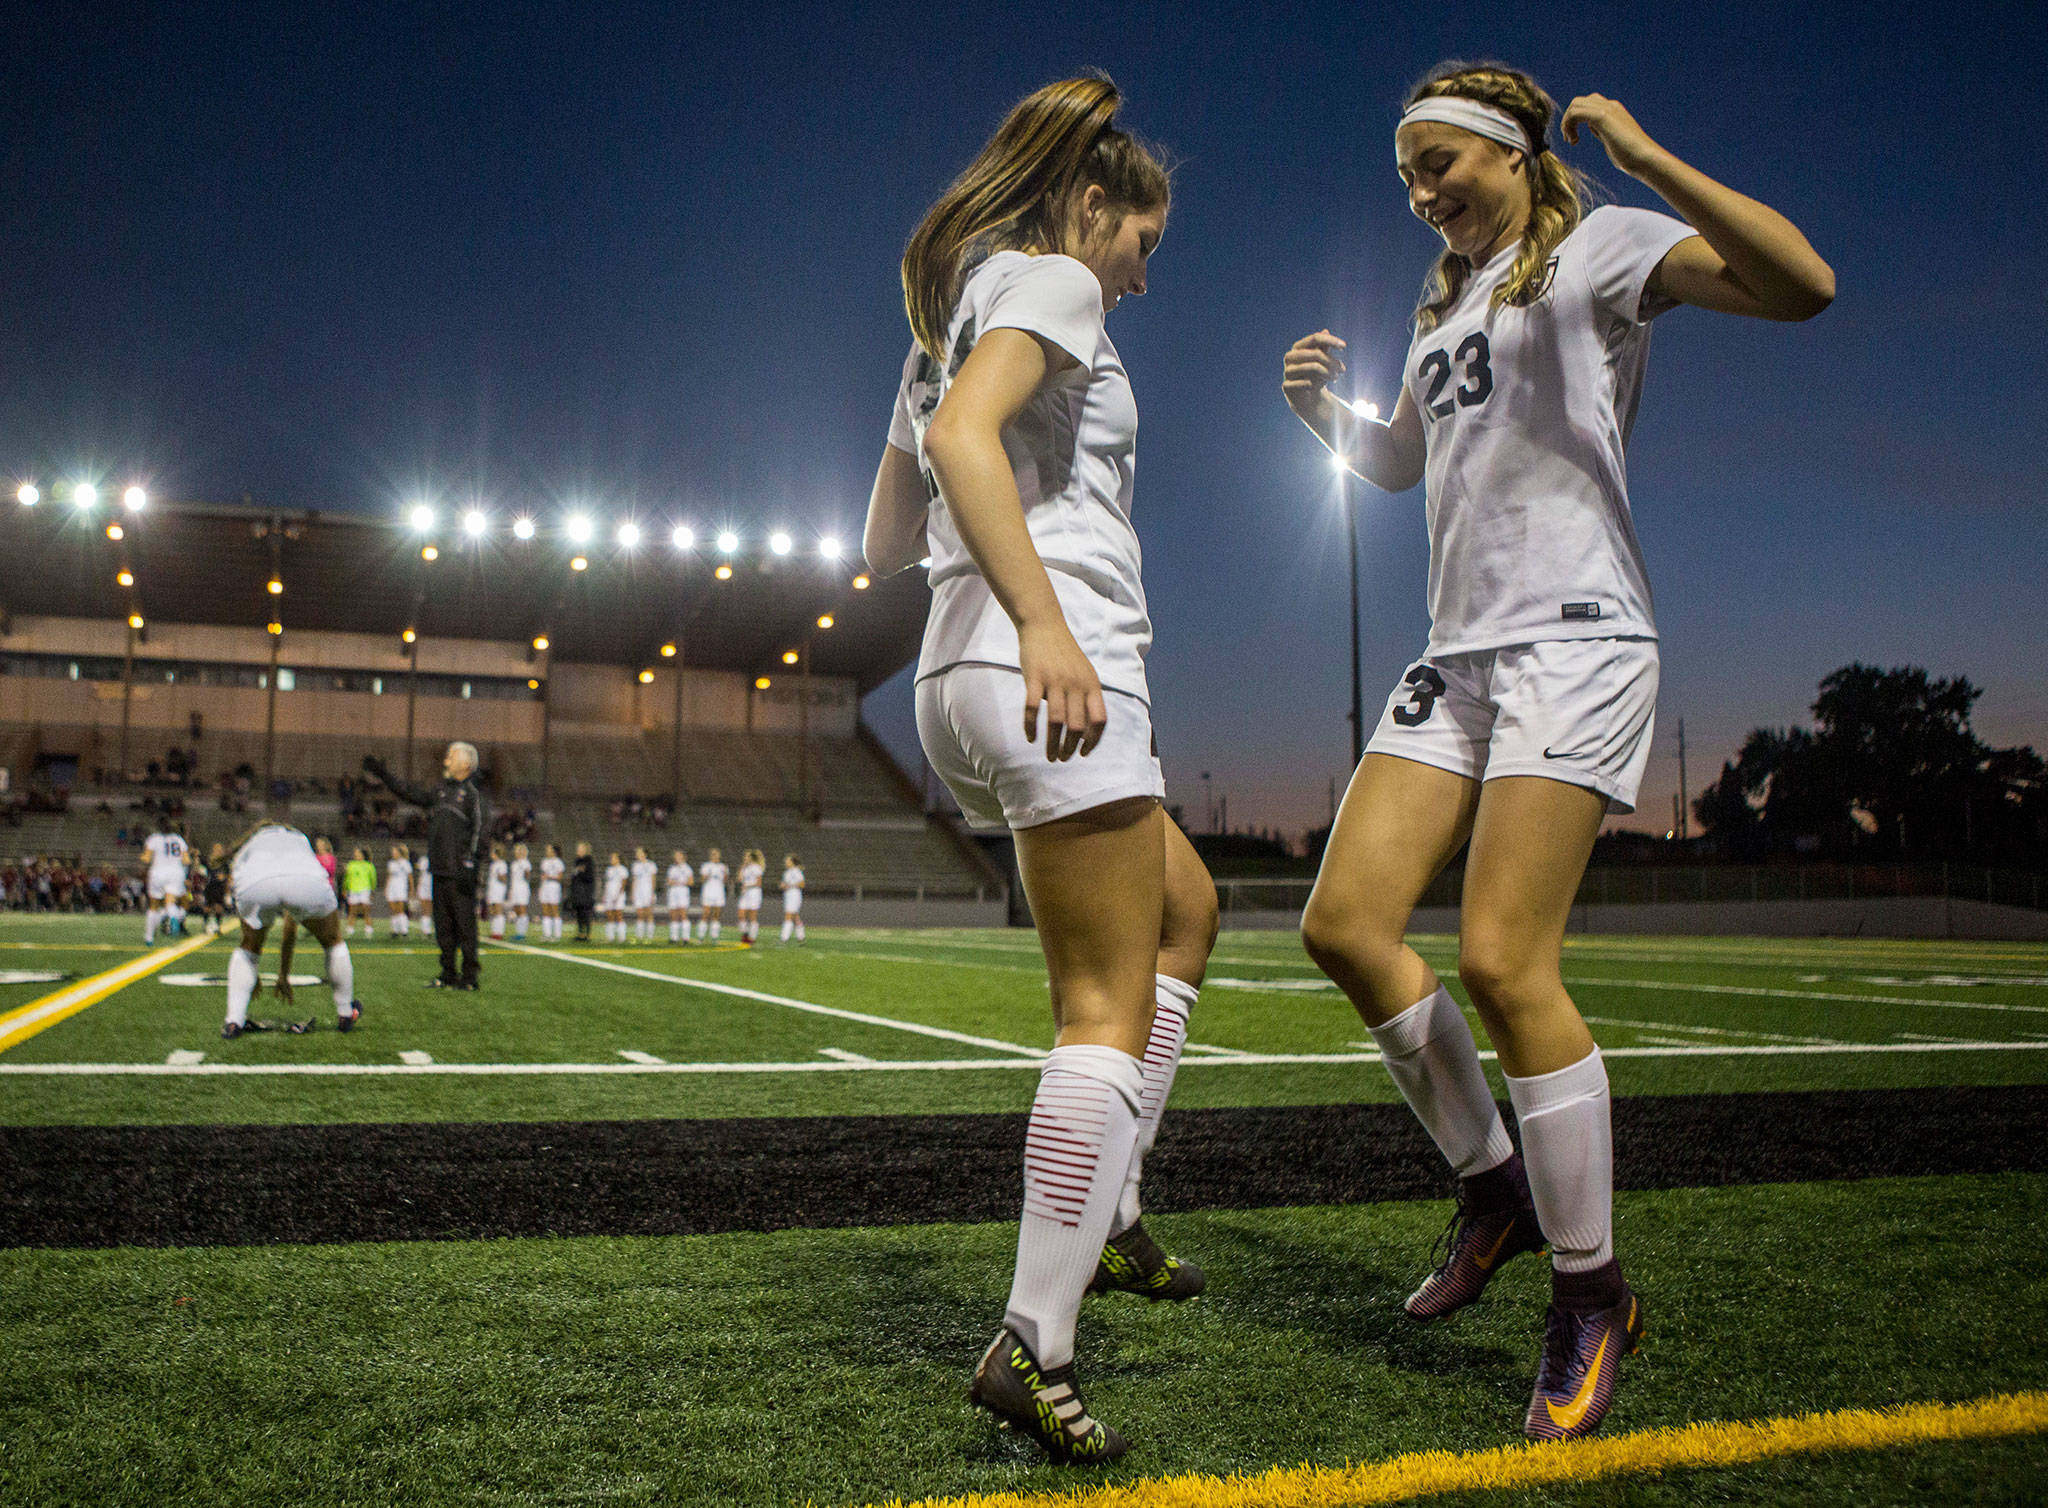 Cedarcrest’s Treena Bolin (left) and Ava Erhardt do a handshake routine before a game against Snohomish on Sept. 25, 2018, in Snohomish. (Olivia Vanni / The Herald)